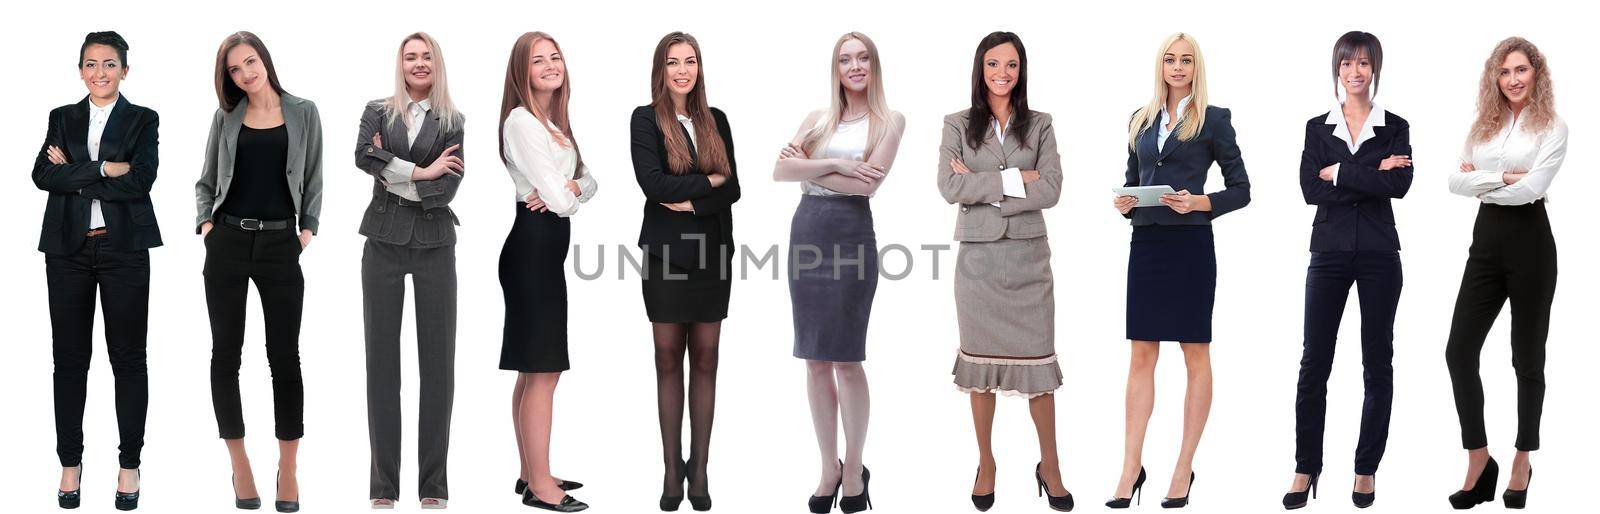 Collection of full-length portraits of young business women by asdf